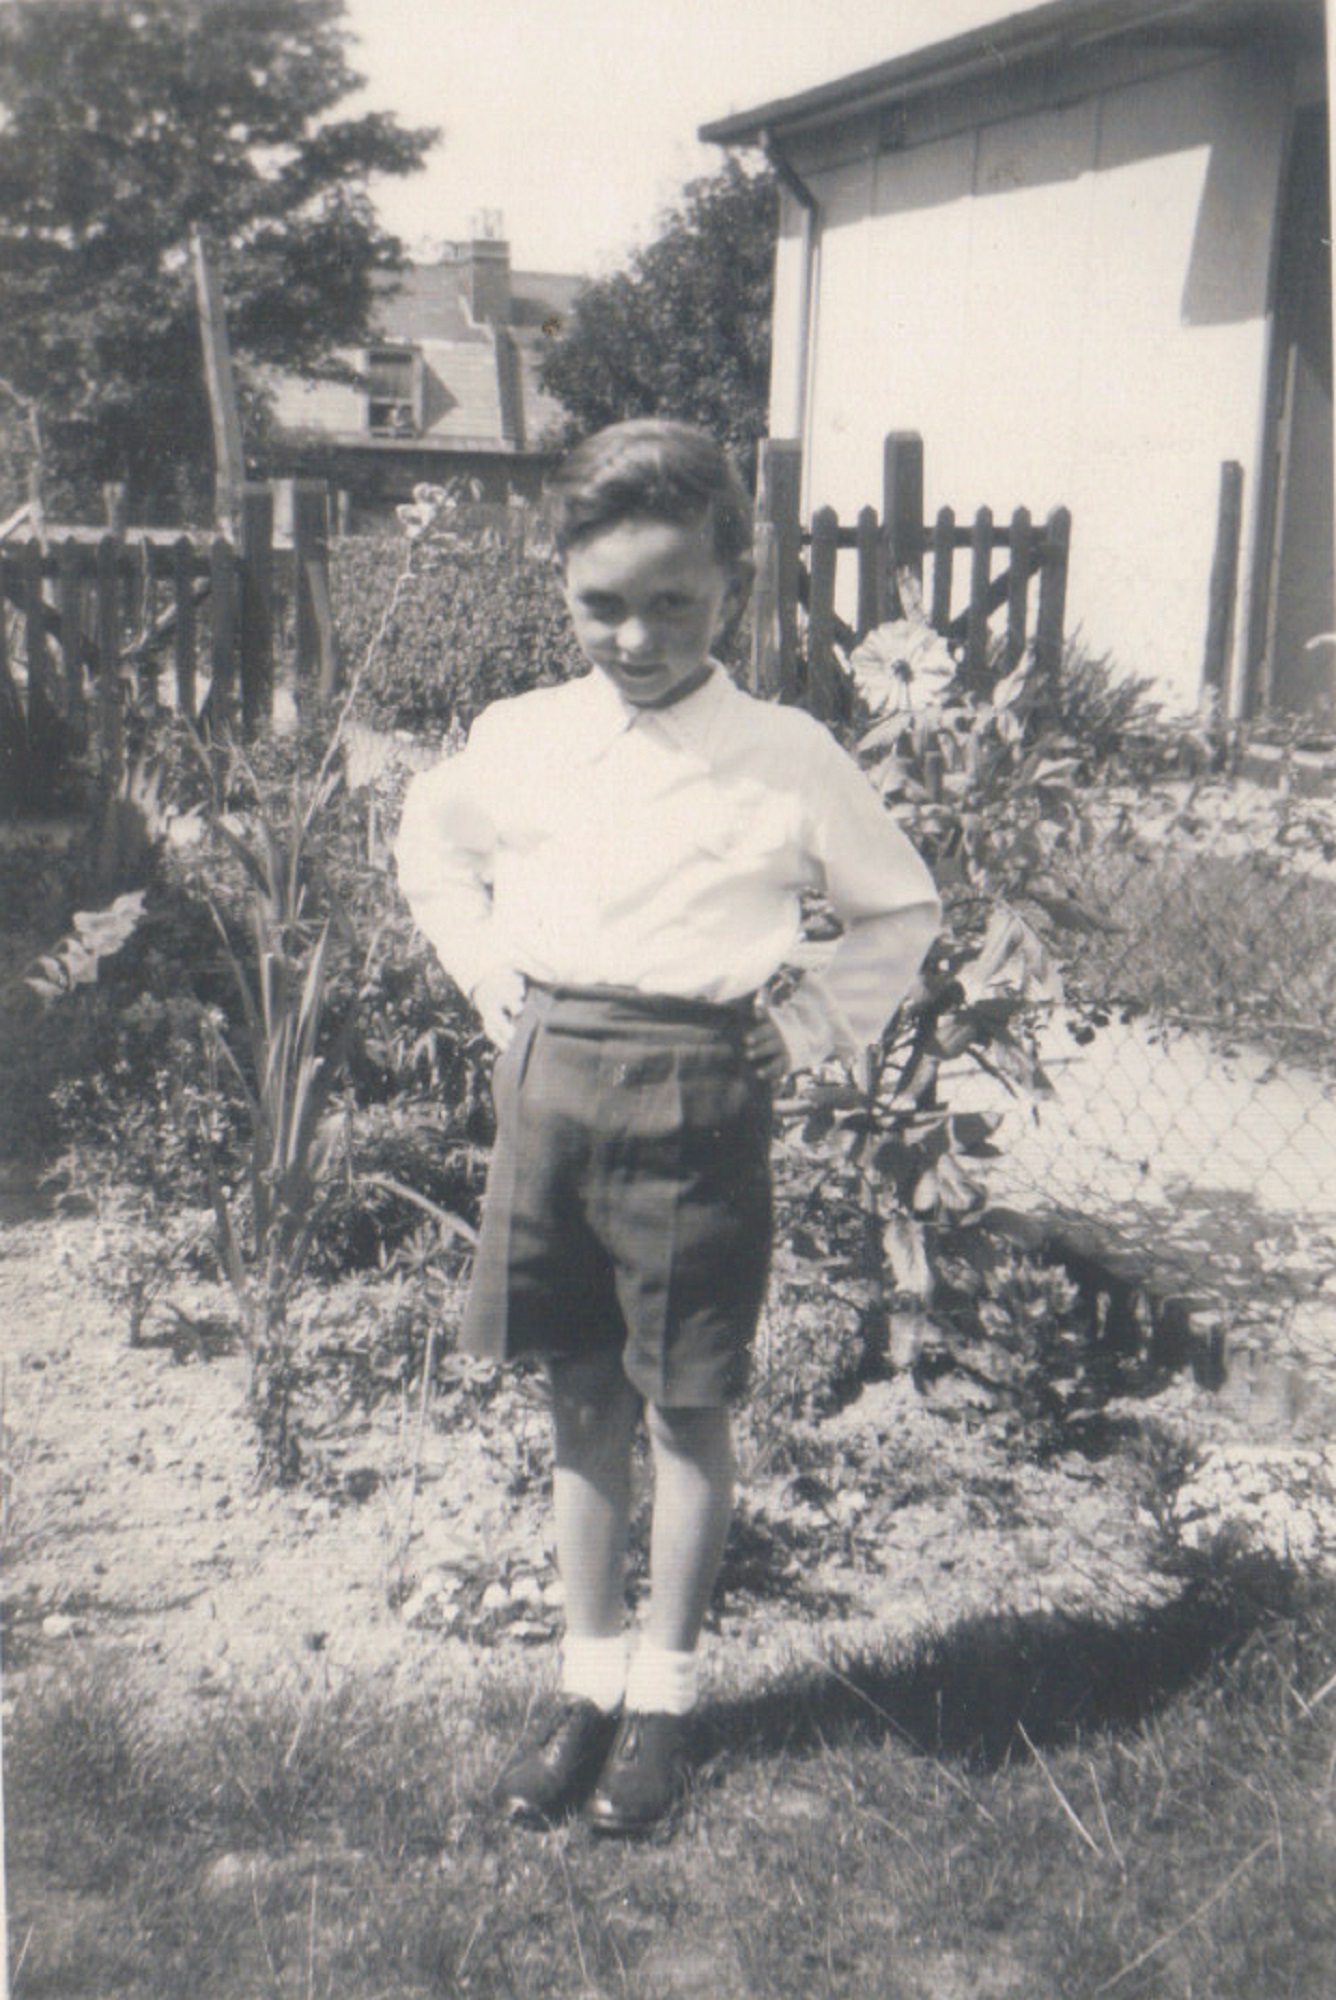 Terence standing by the flowerbed in his prefab garden, Dartmouth Park Hill, London N19